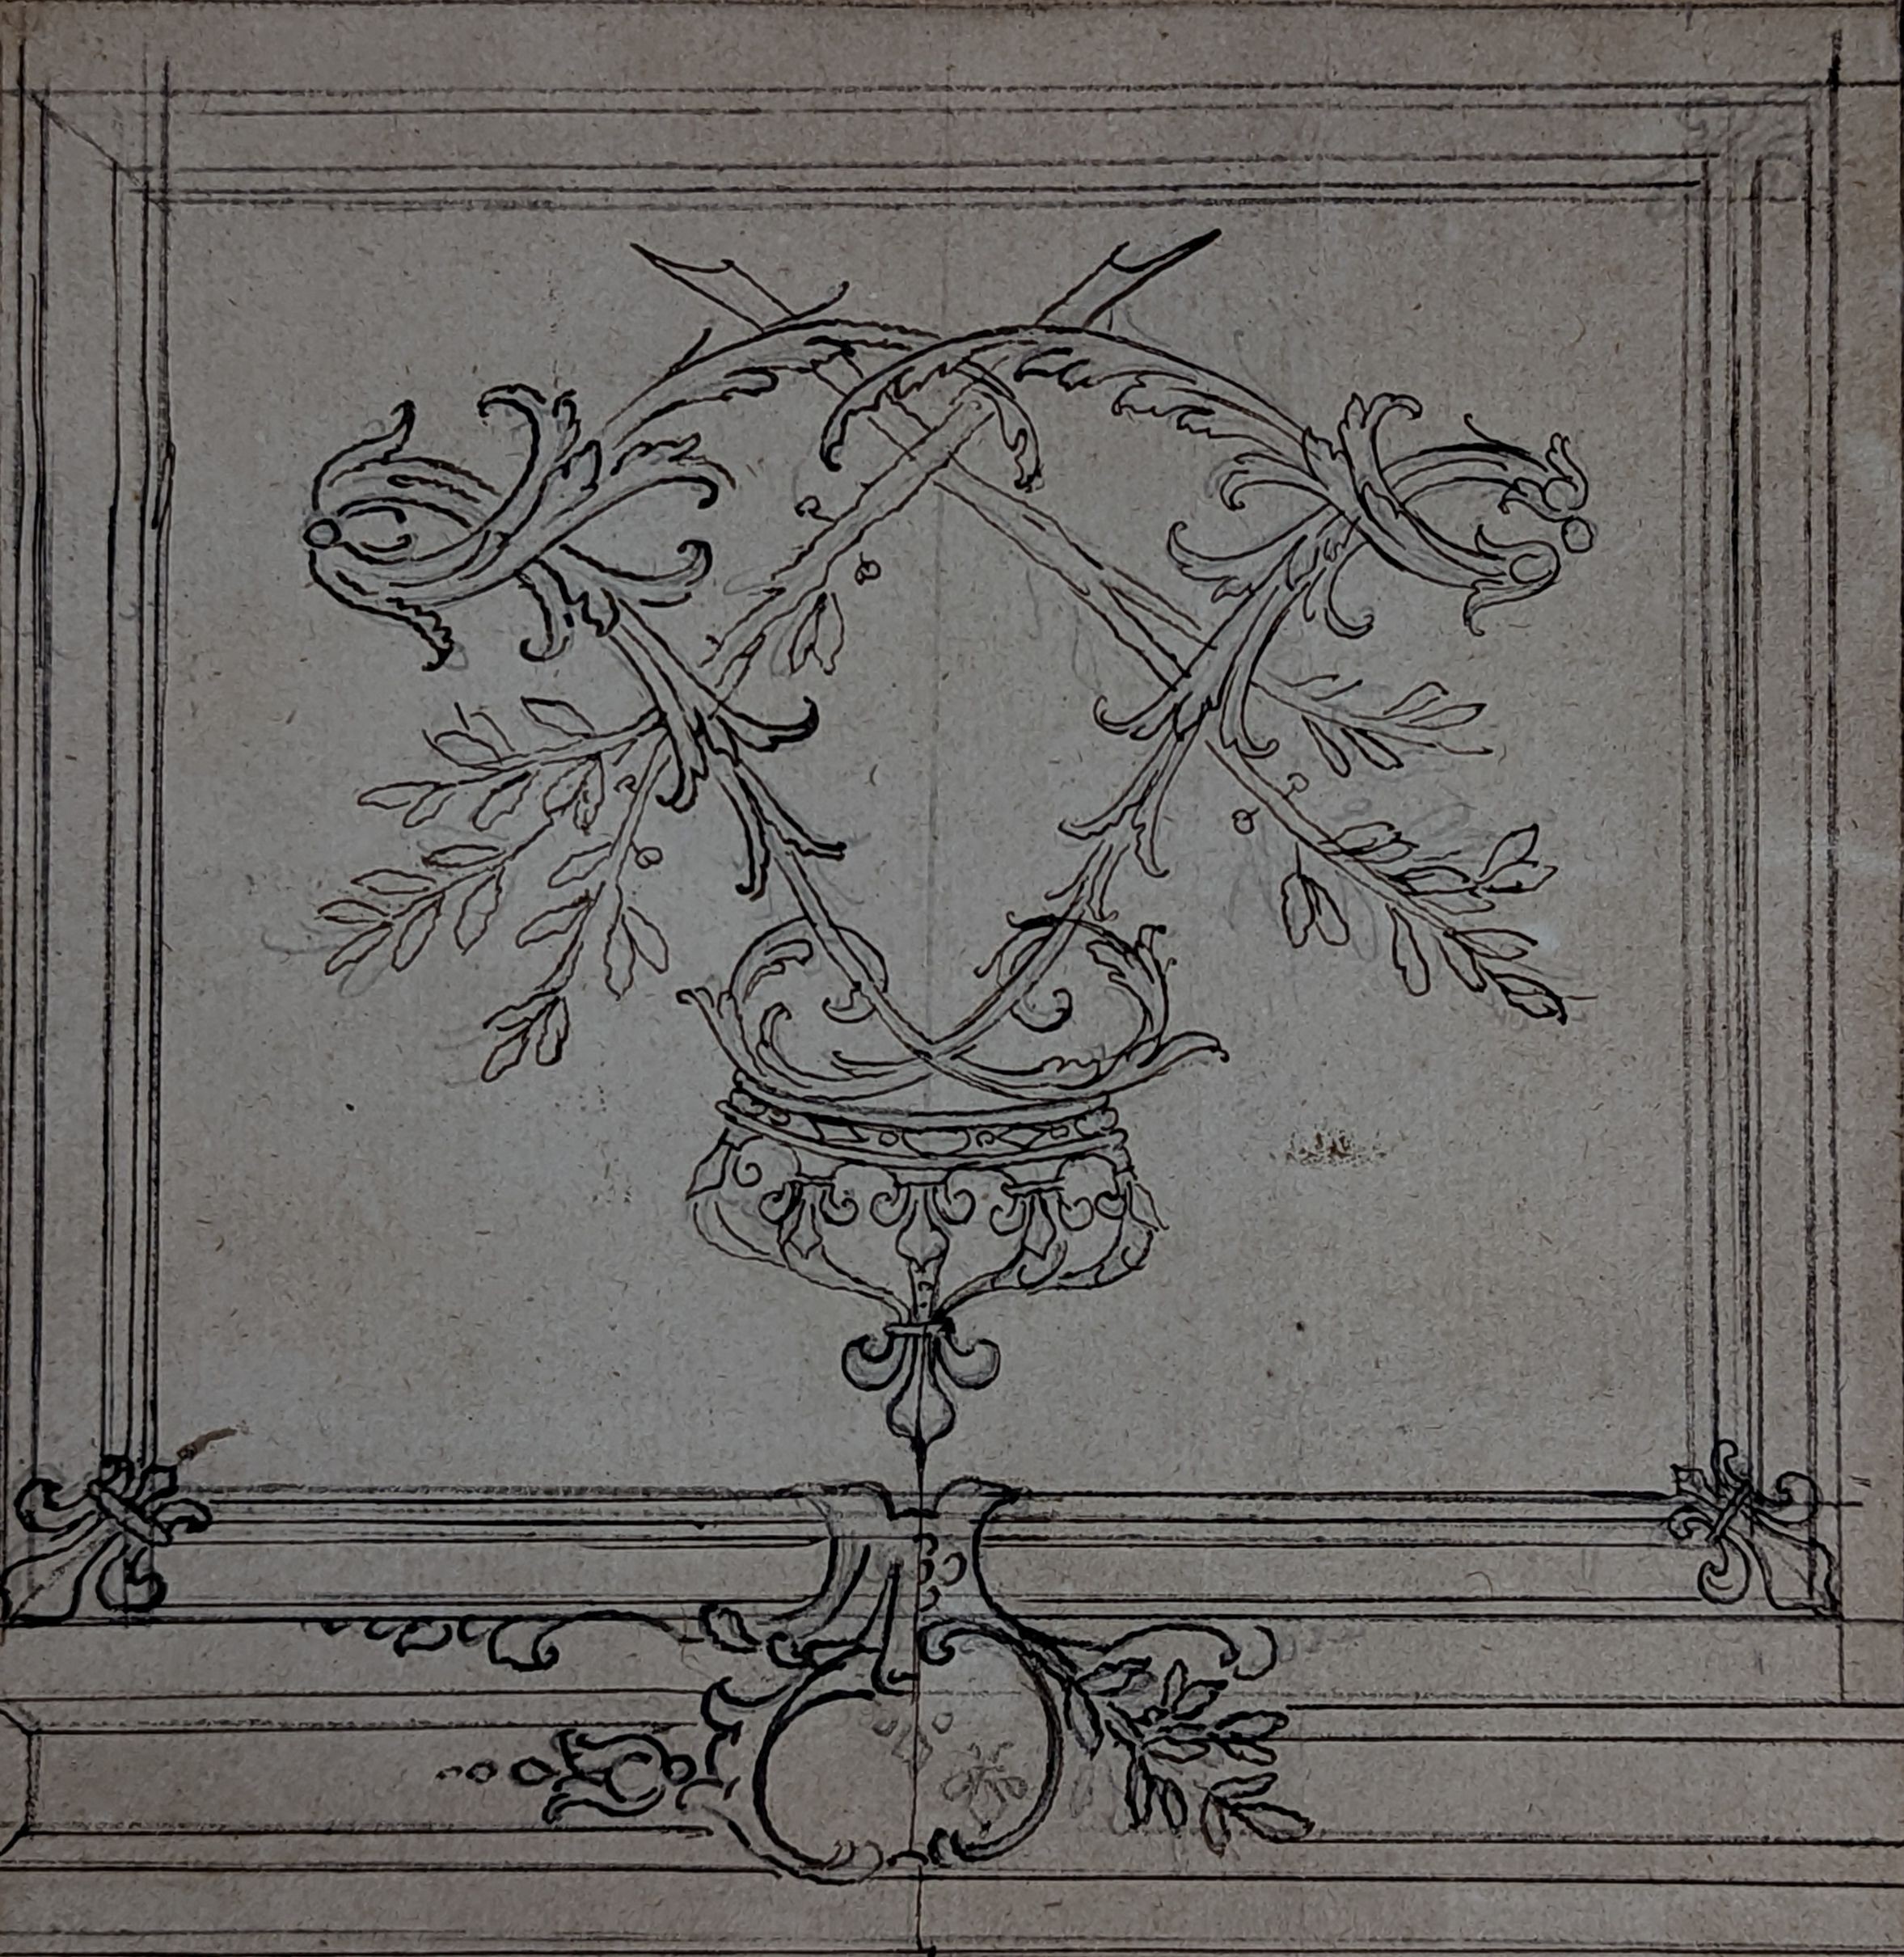 French School c.1750, pen and ink, The Royal Cypher of Louis XV, 18 x 17cm